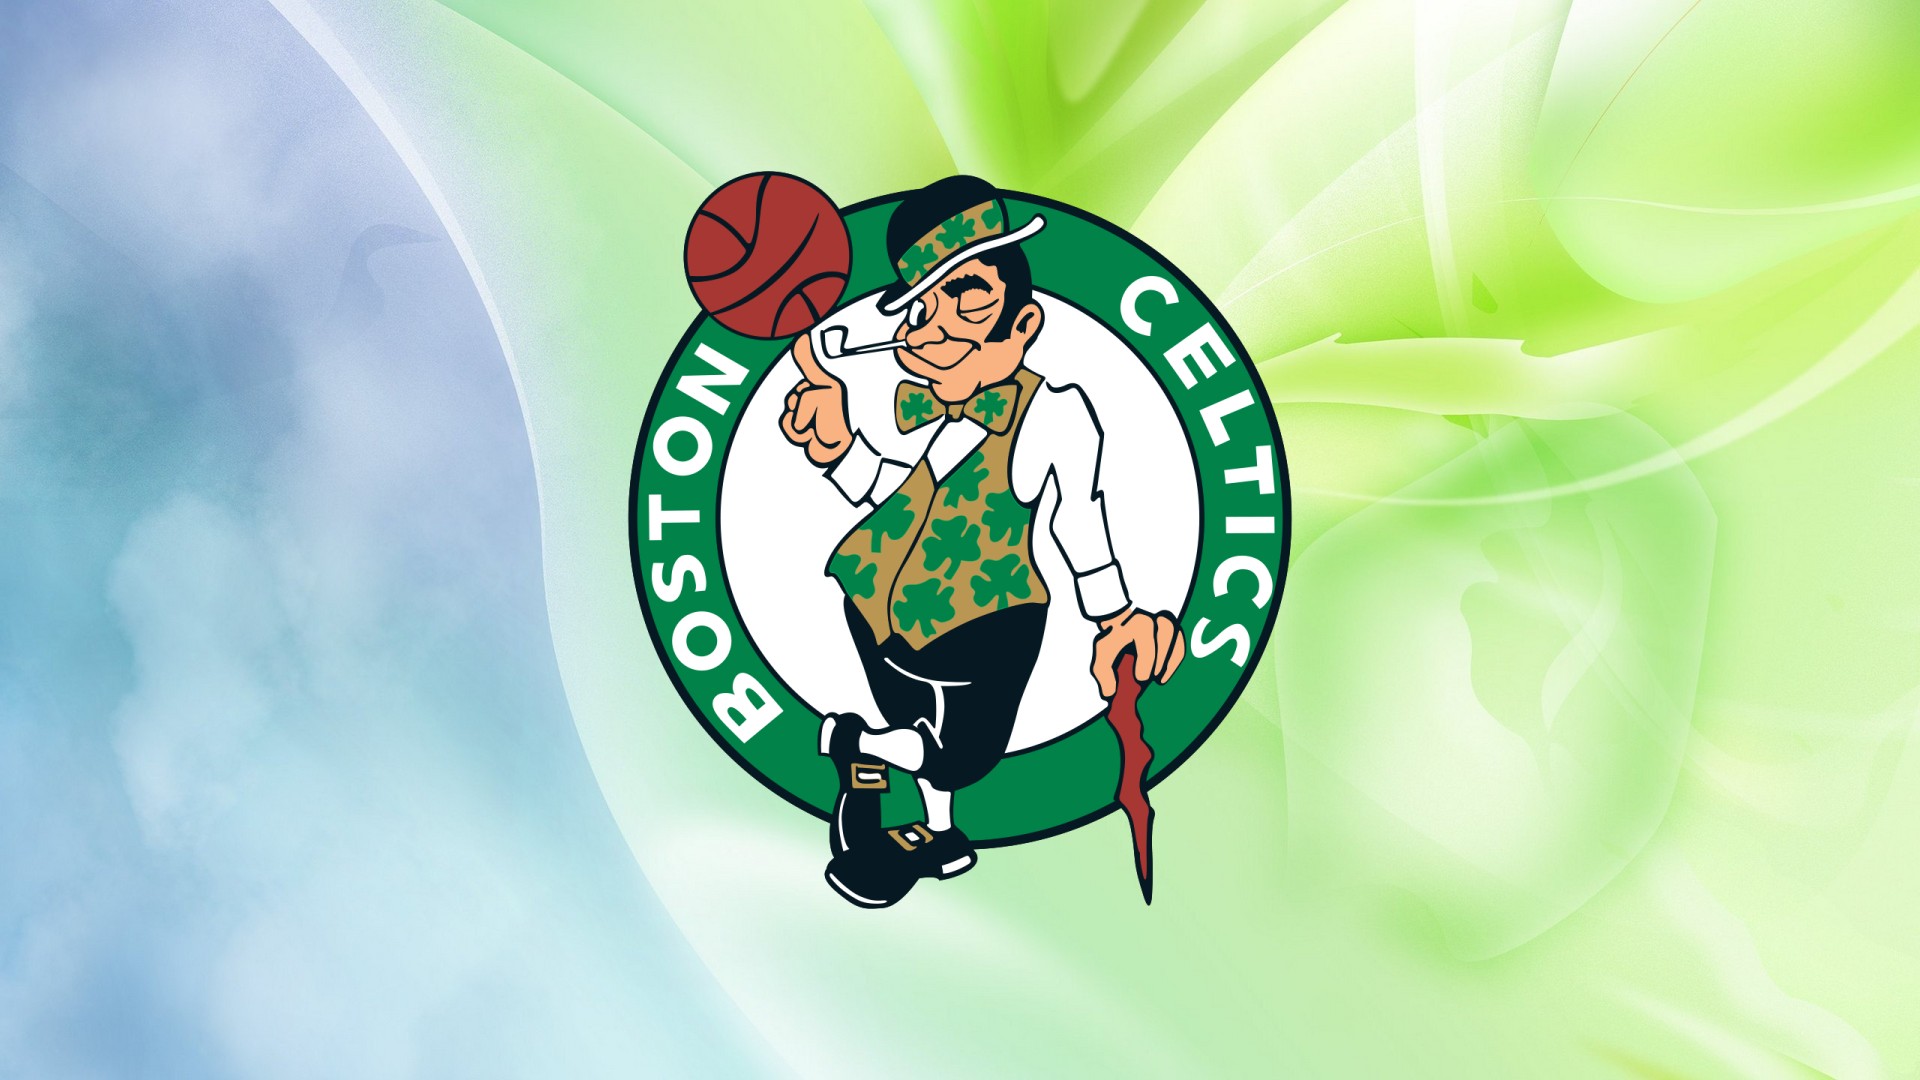 HD Wallpaper Boston Celtics with image resolution 1920x1080 pixel. You can make this wallpaper for your Desktop Computer Backgrounds, Mac Wallpapers, Android Lock screen or iPhone Screensavers